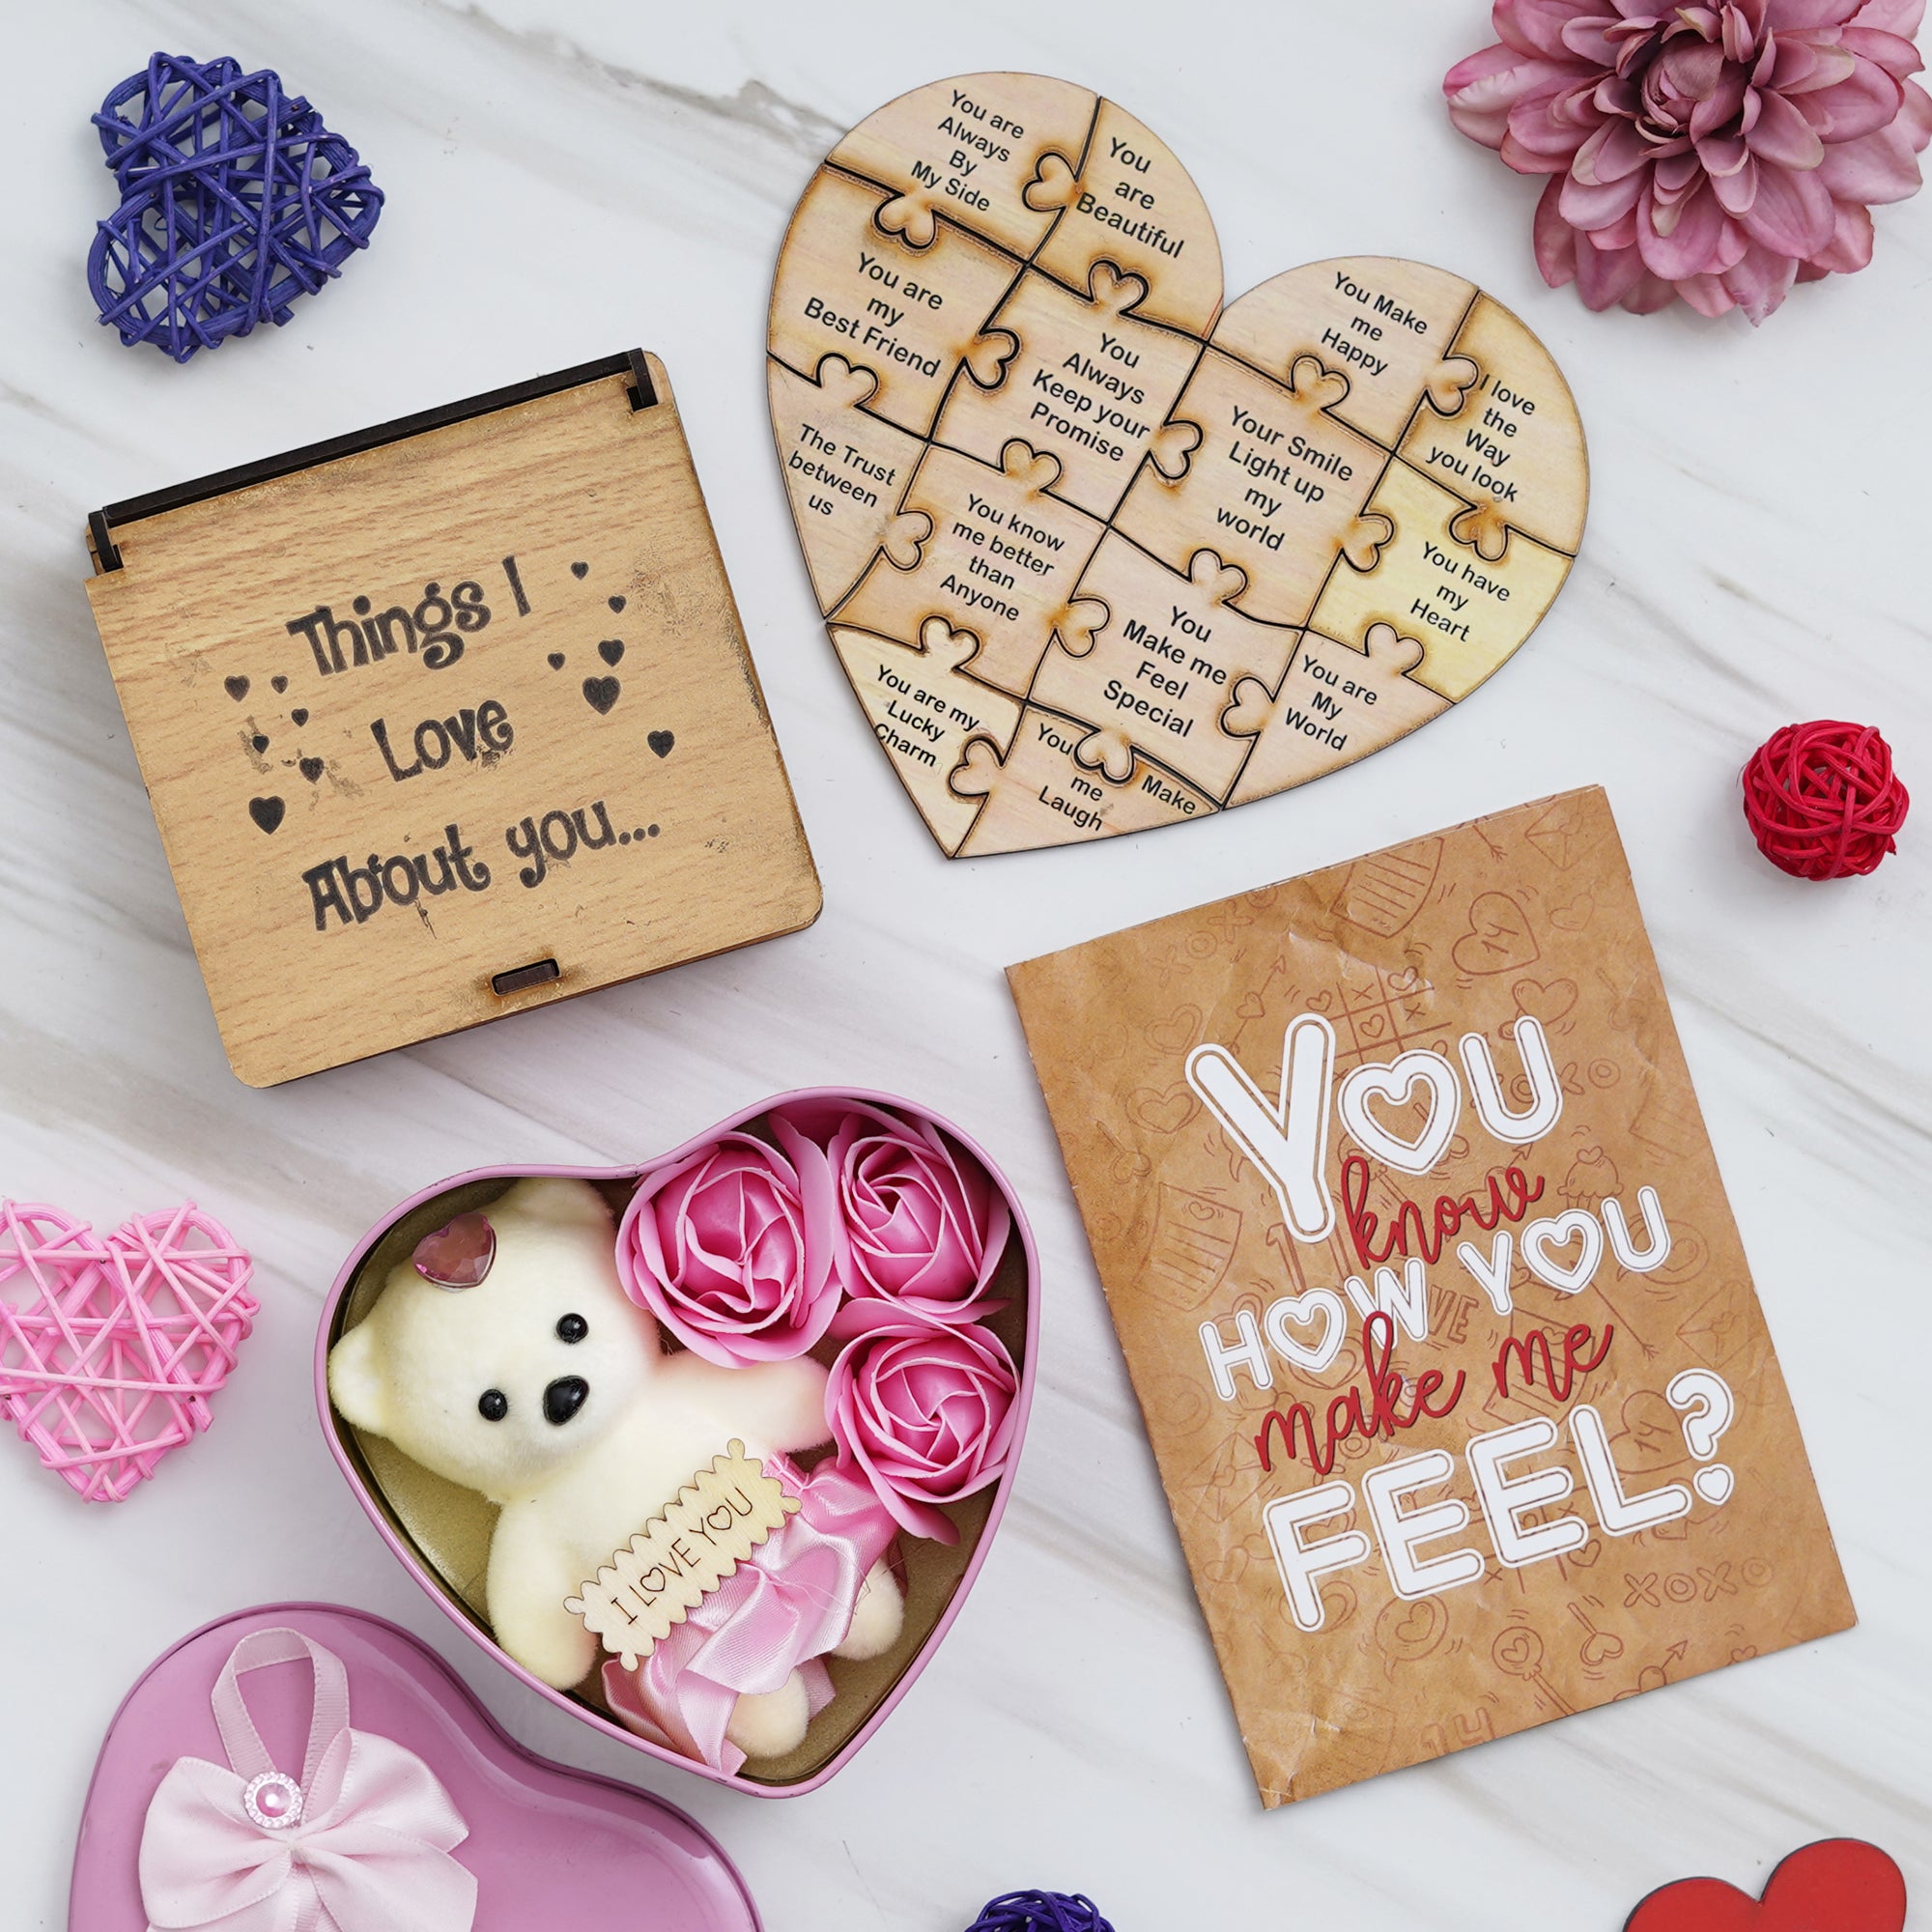 Valentine Combo of Card, "Things I Love About You" Puzzle Wooden Gift Set, Pink Heart Shaped Gift Box with Teddy and Roses